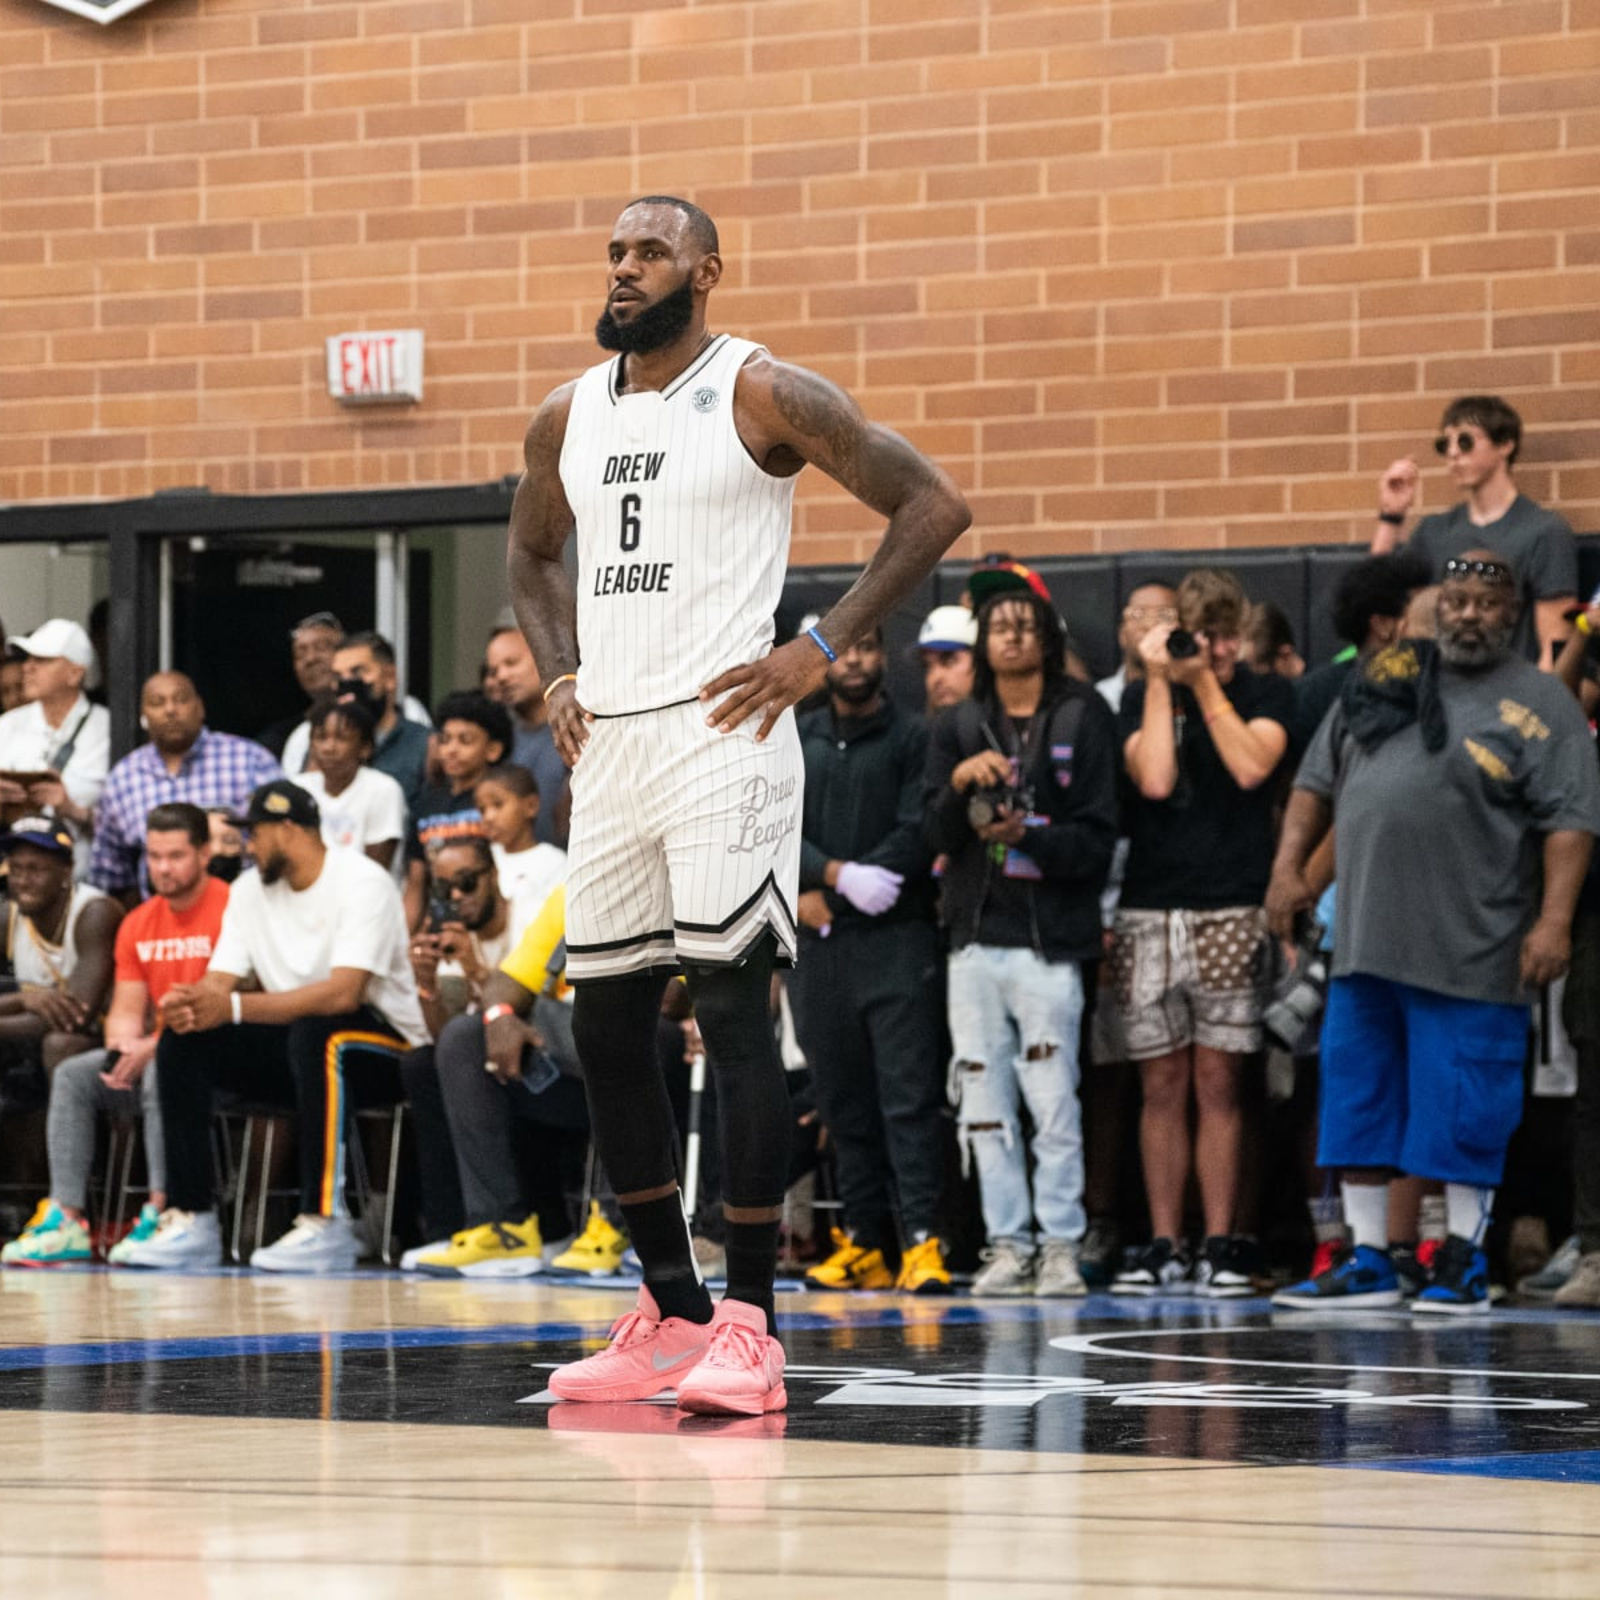 LeBron James puts on show with DeMar DeRozan in Drew League game